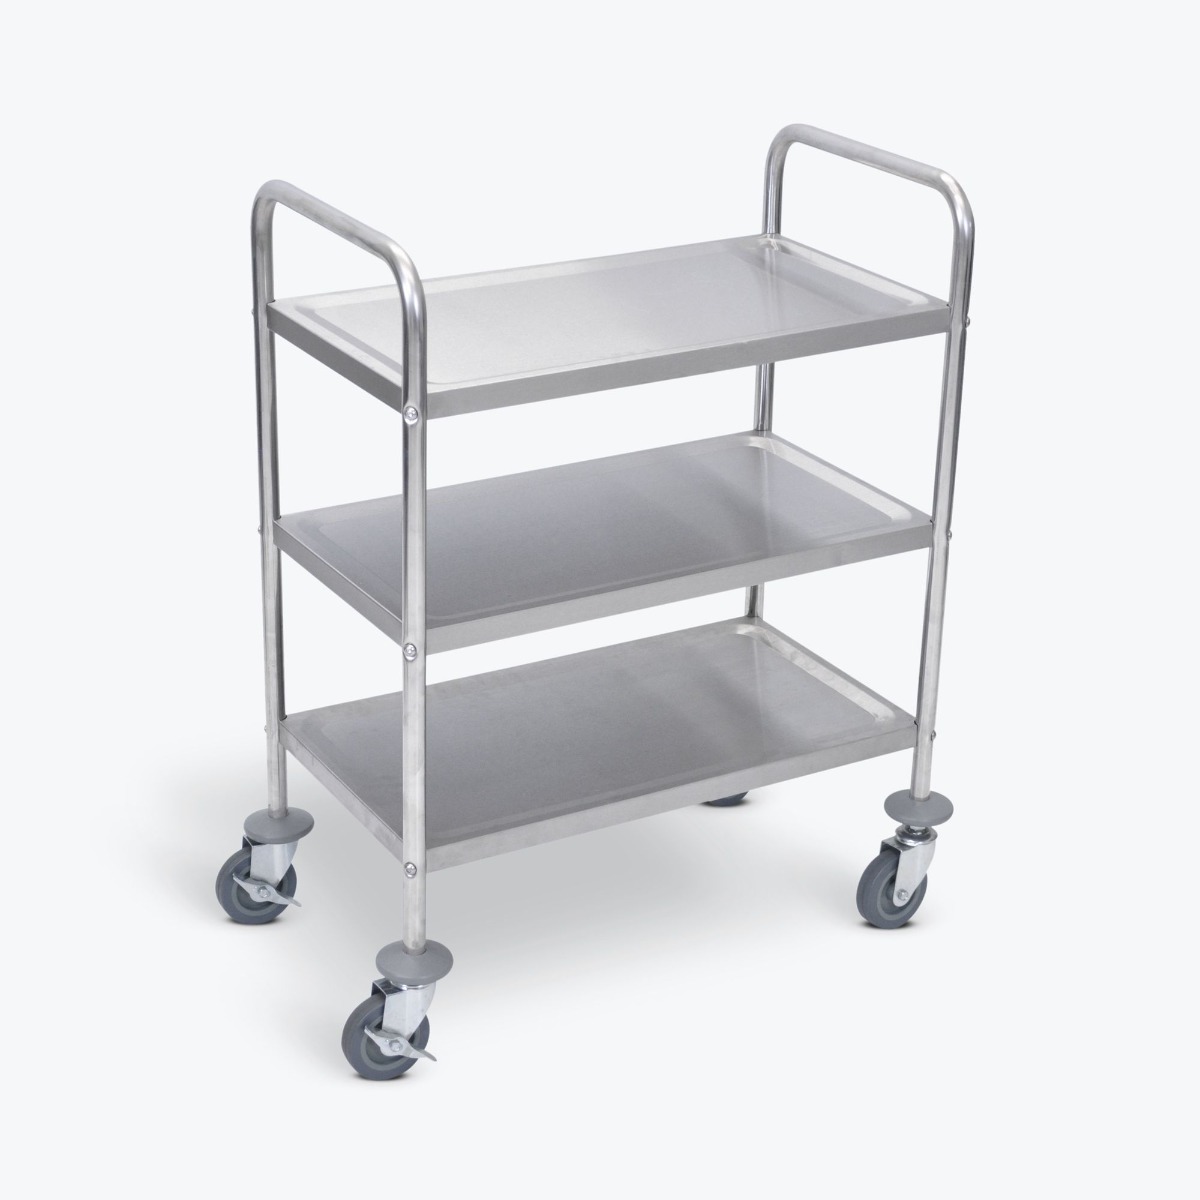 stainless steel cart